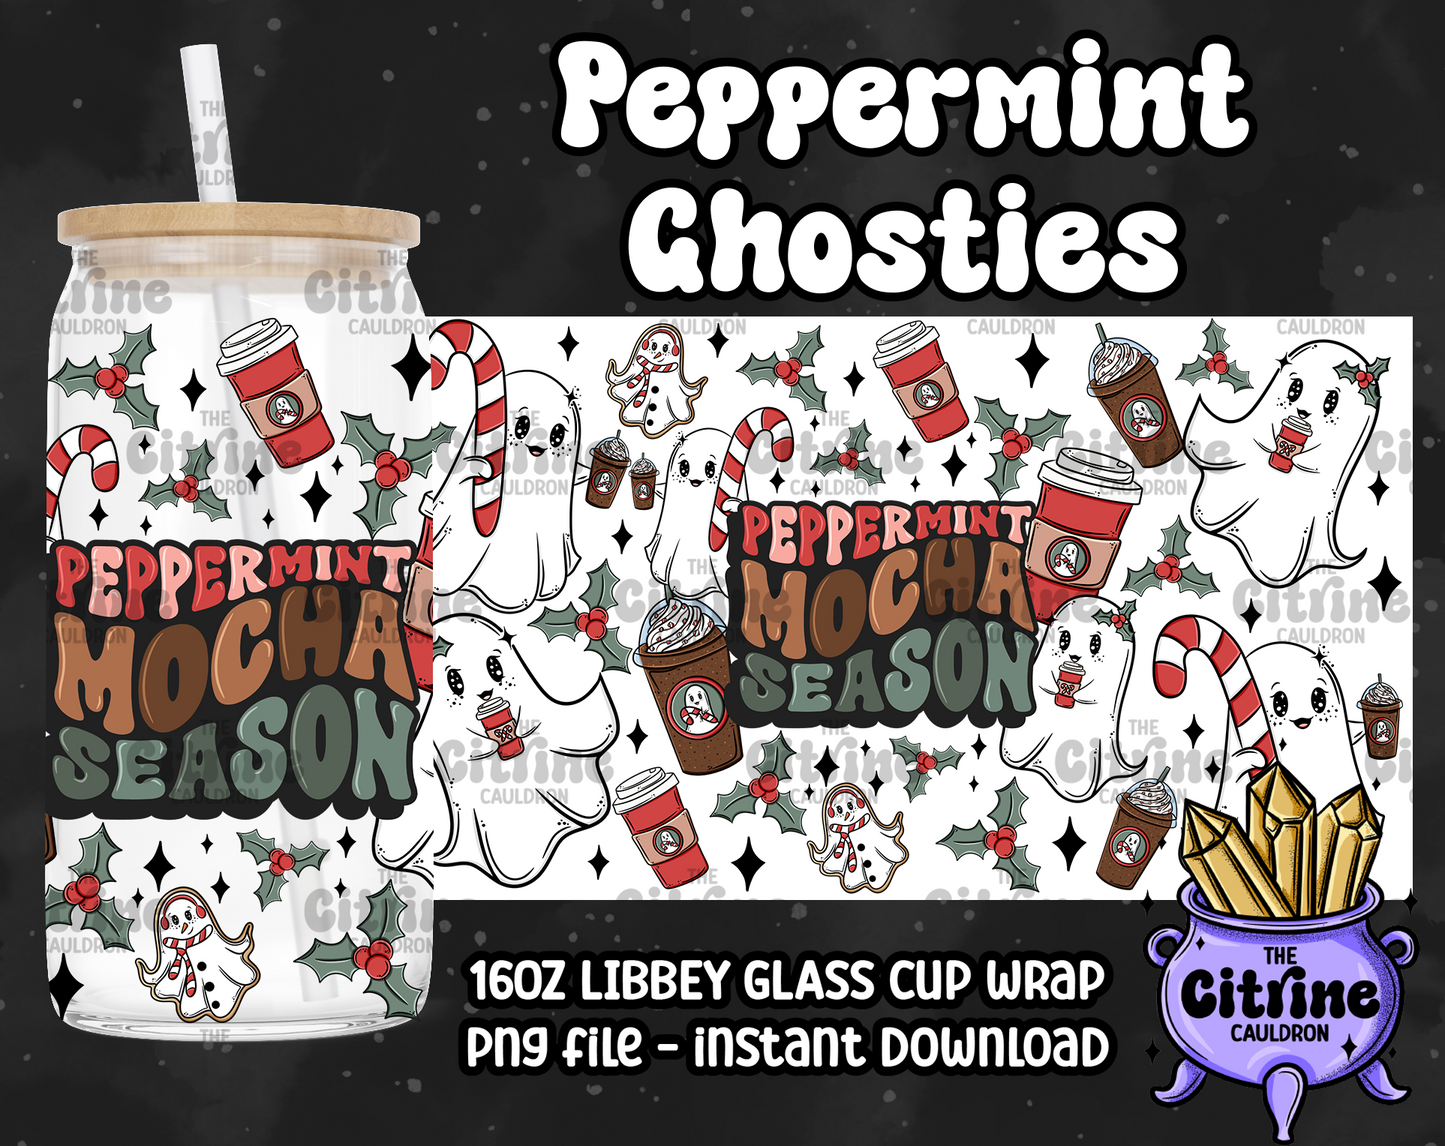 Peppermint Ghosties - PNG Wrap for Libbey 16oz Glass Can